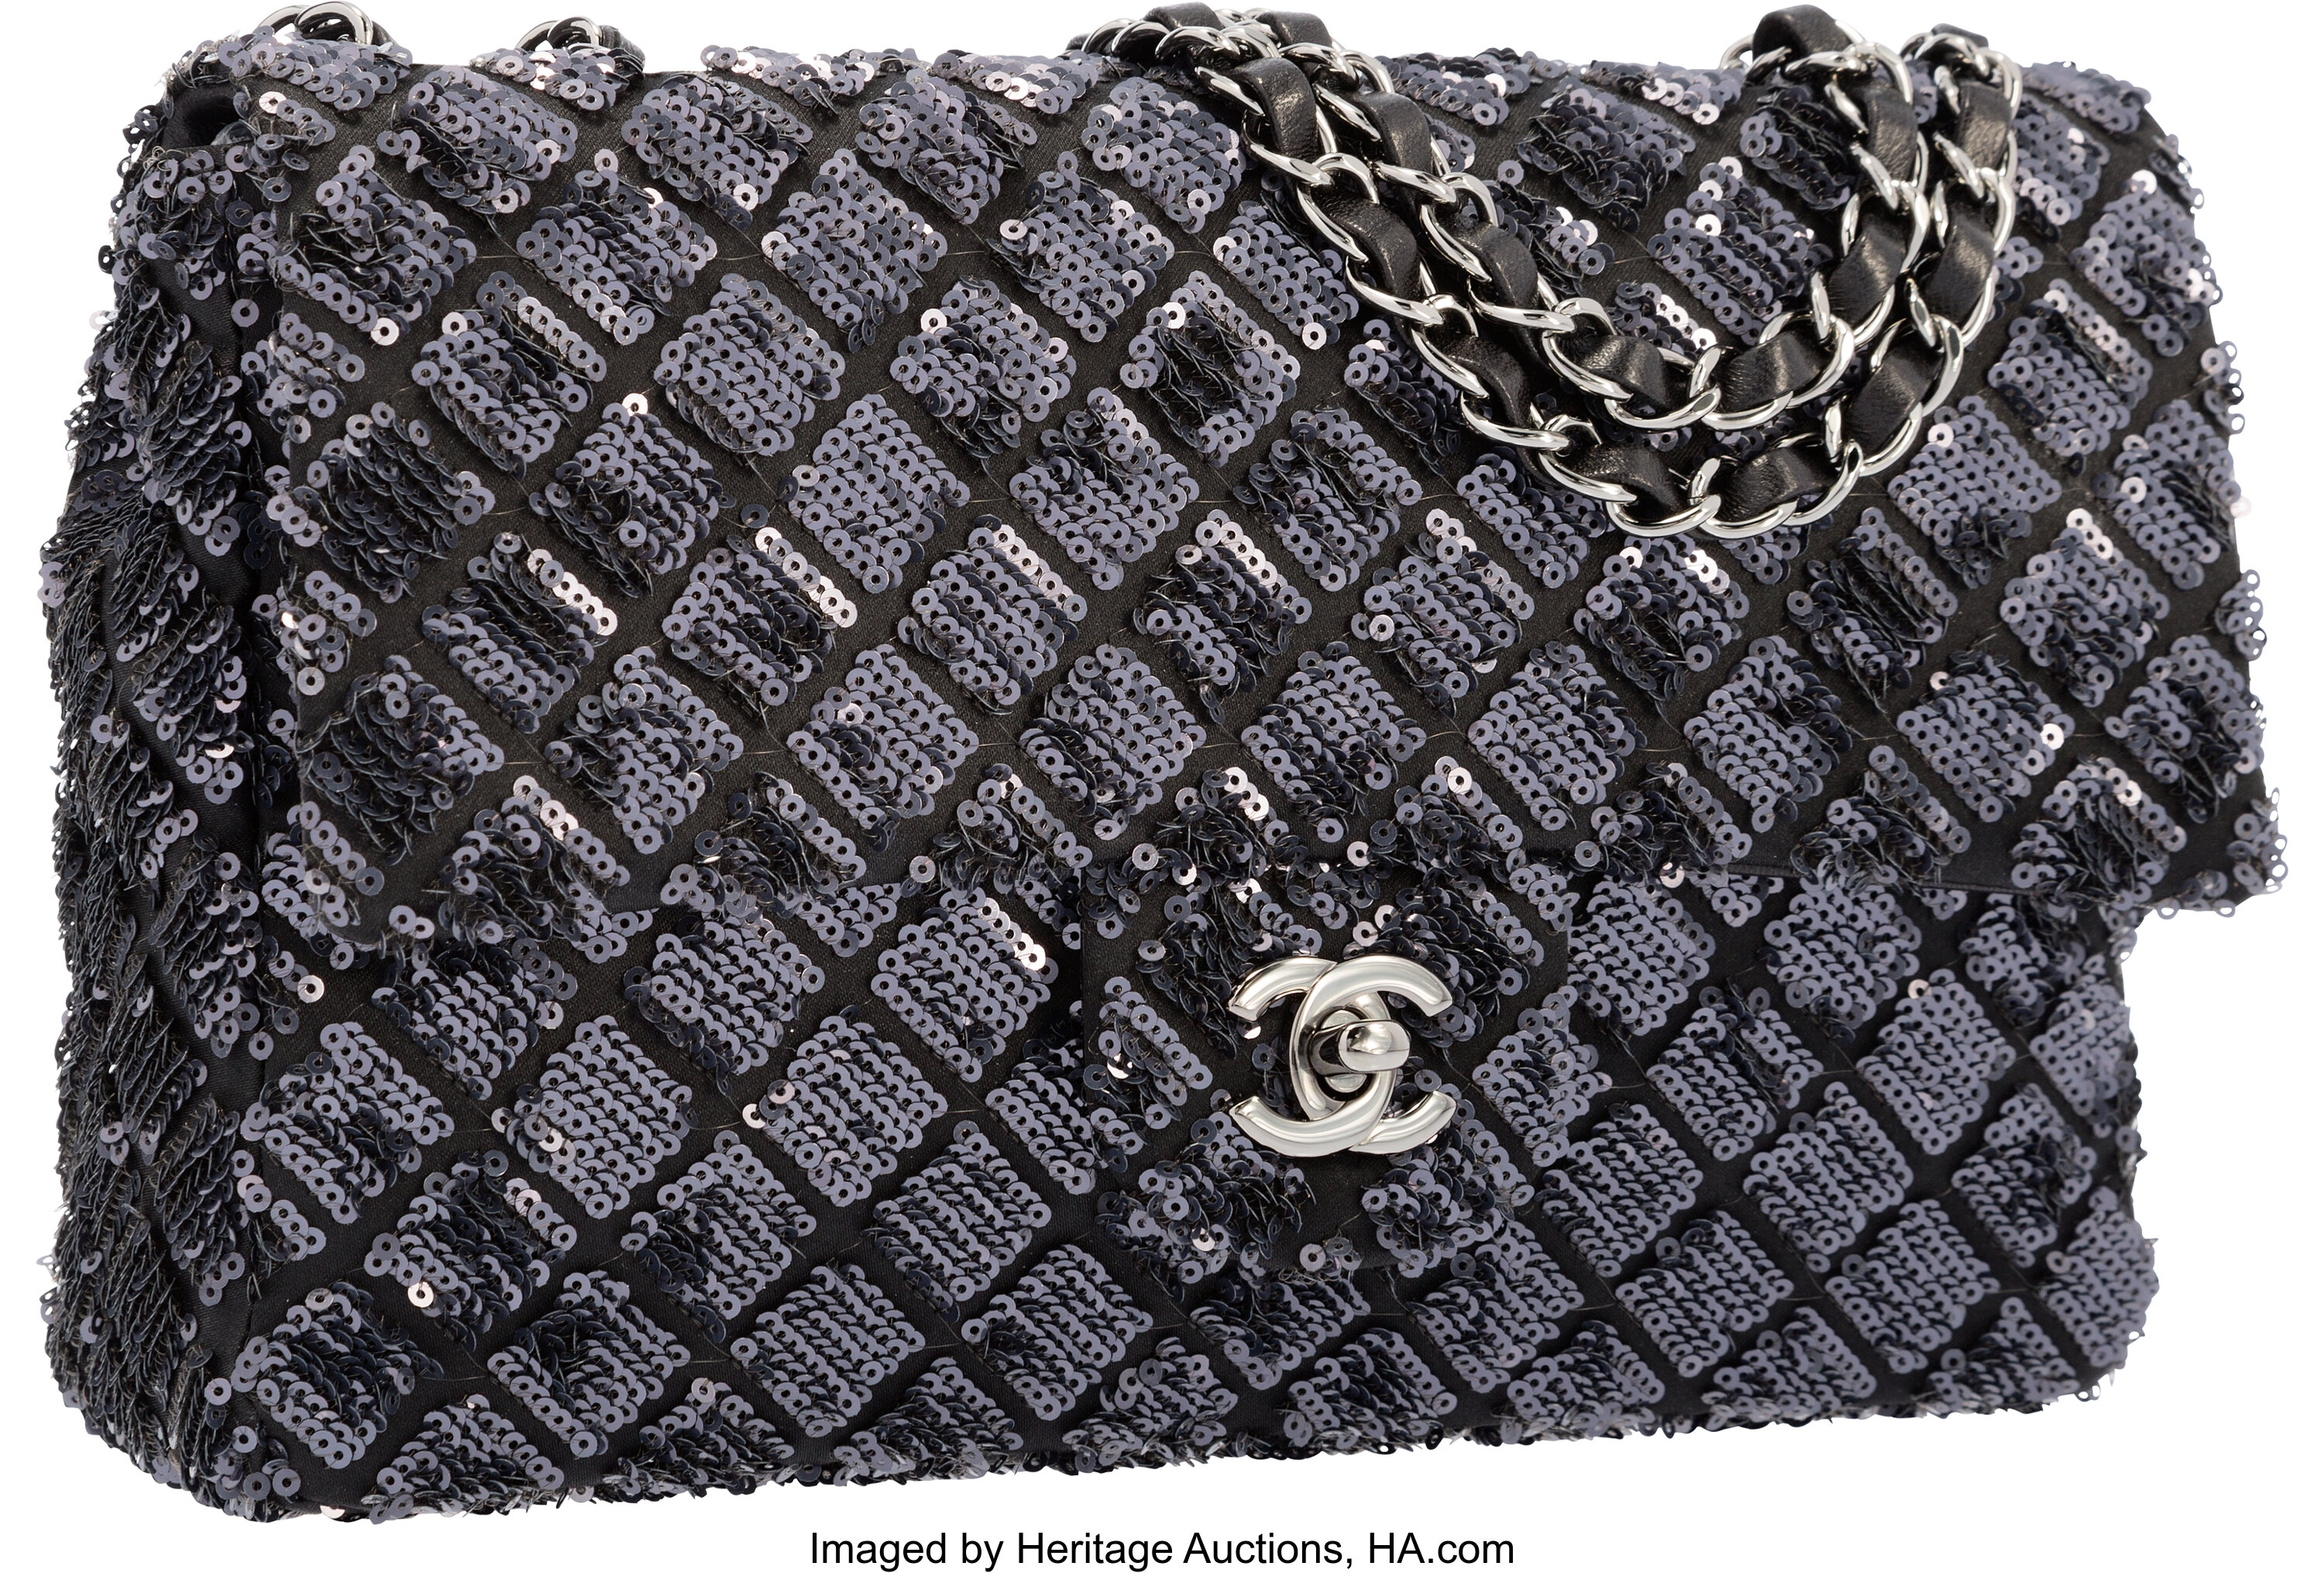 Chanel Black & Navy Blue Sequin Medium Single Flap Bag with | Lot #58241 |  Heritage Auctions